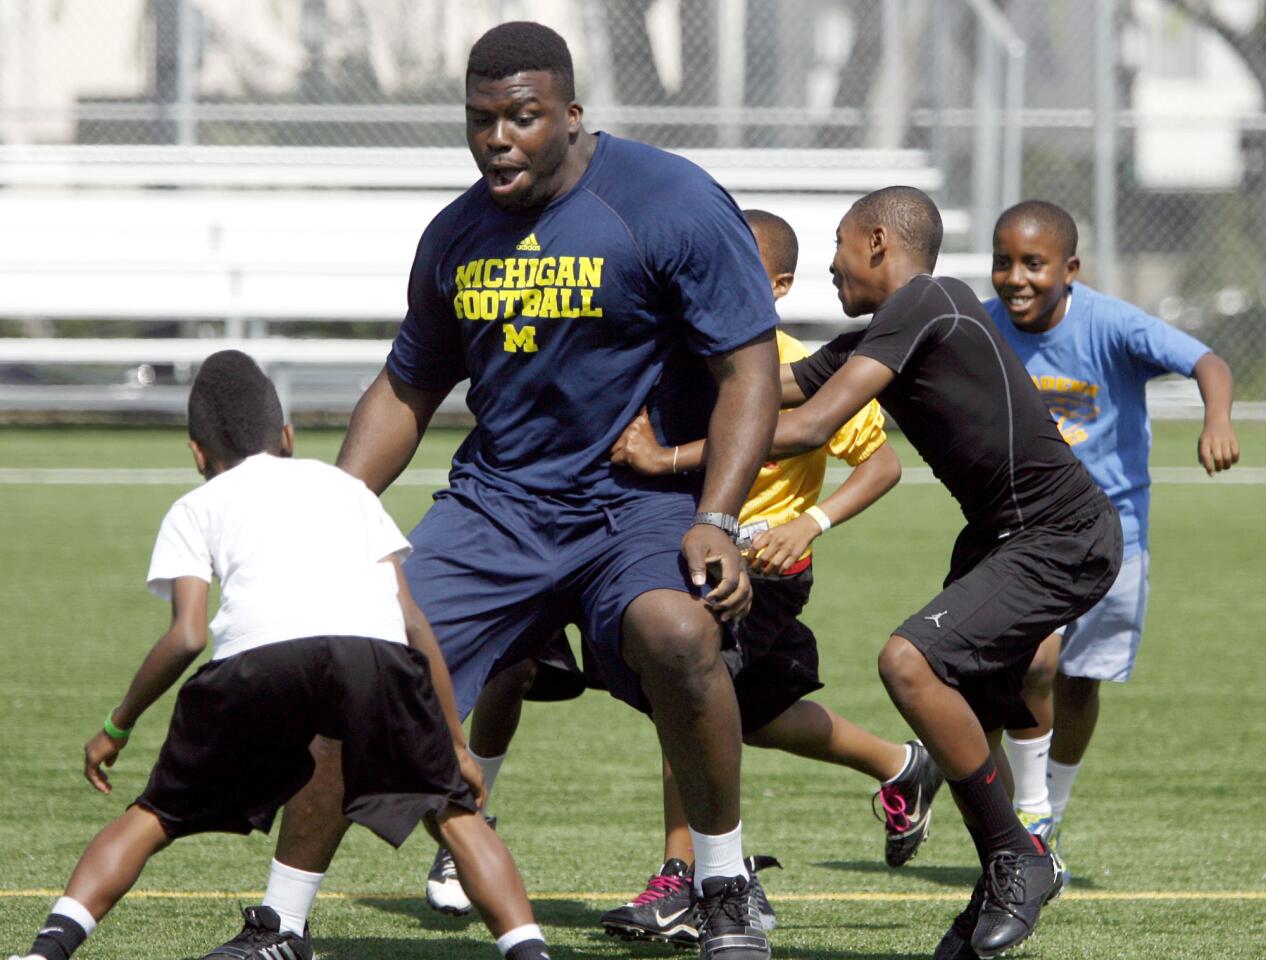 University of Michigan DL Will Campbell tries to get away from a crowd of young tacklers during workout with about 80 local youth as part of Pasadena's Youth Camp Mentoring Program at Robinson Park in Pasadena on Thursday, May 24, 2012.